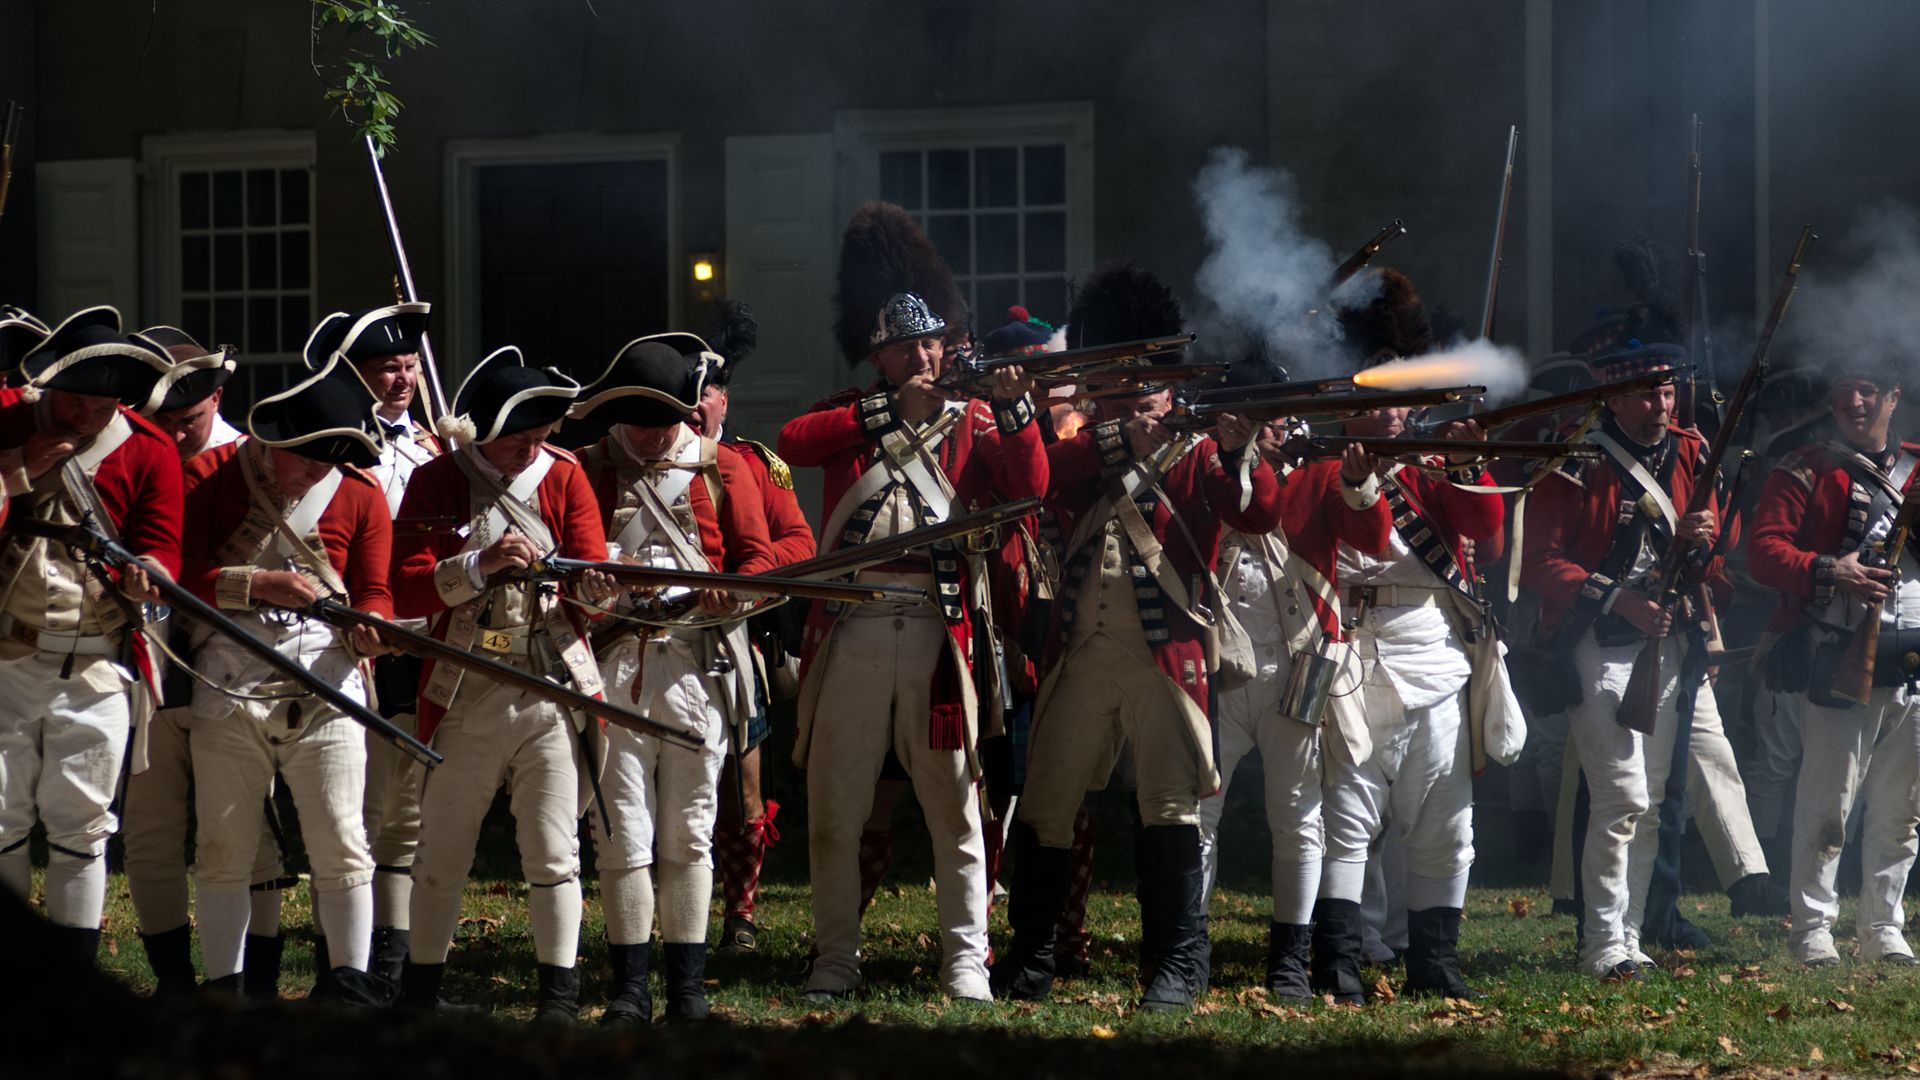 Annual re-enactment of the Battle of Germantown during the Revolutionary Germantown Festival at the Grounds of Cliveden, in Northwest Philadelphia, on October 7, 2017.